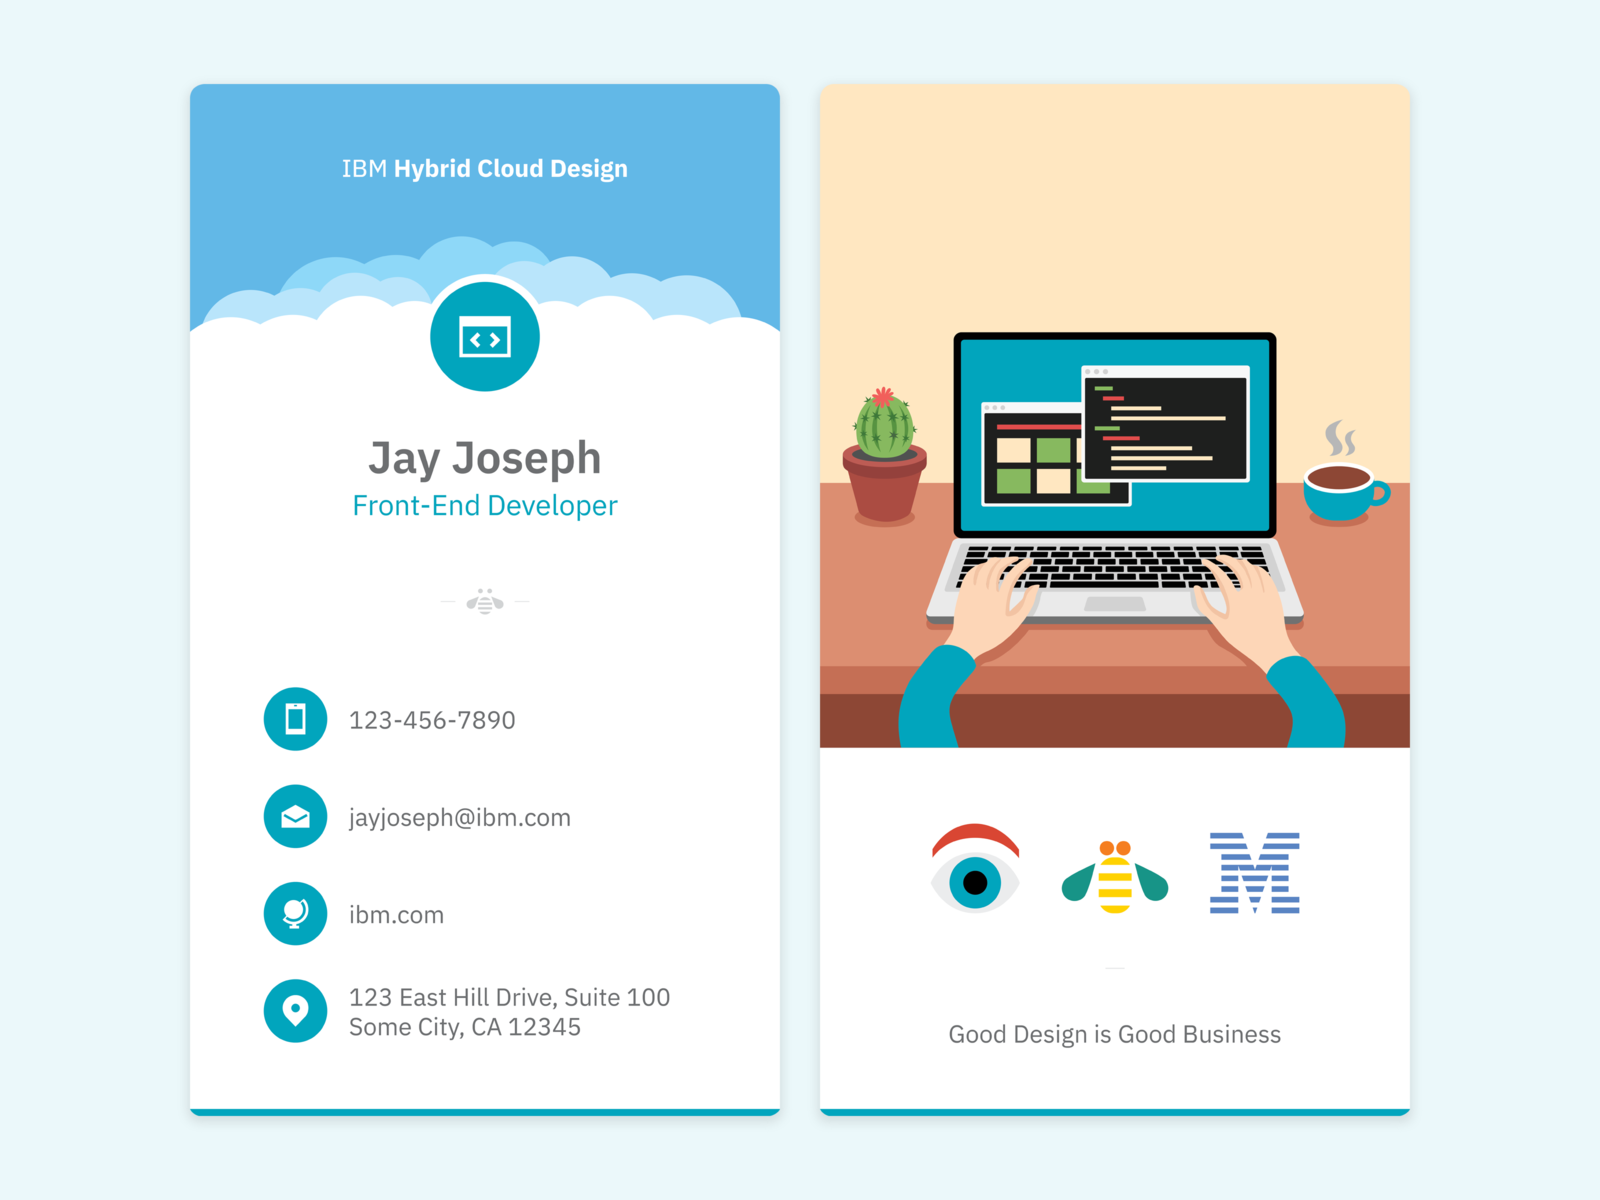 Business Card Design - Front-End Developer by Wayne Chou on Dribbble Within Ibm Business Card Template